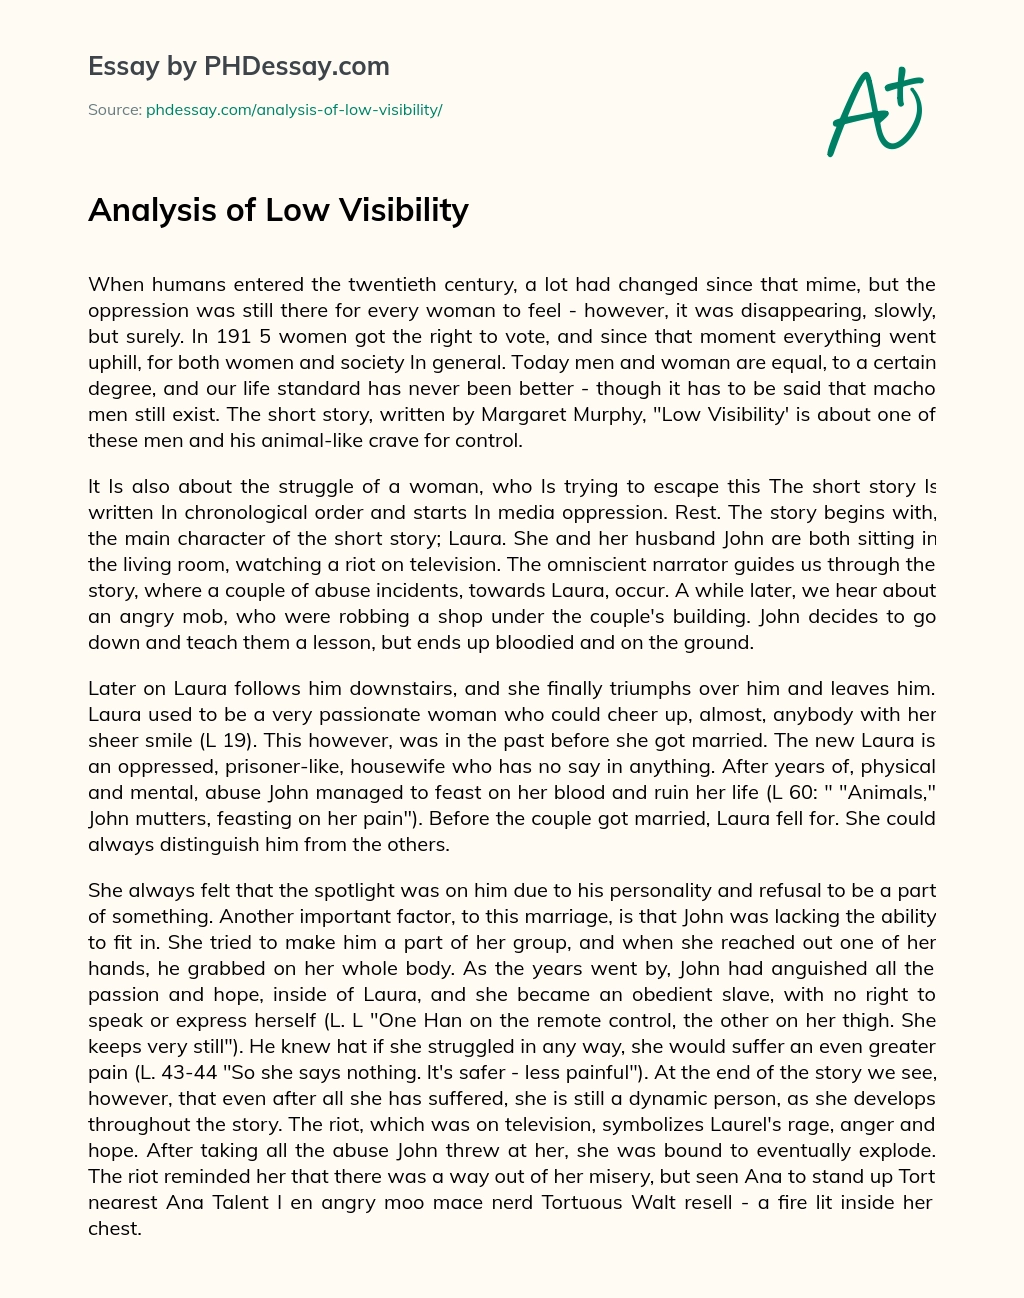 Analysis of Low Visibility essay